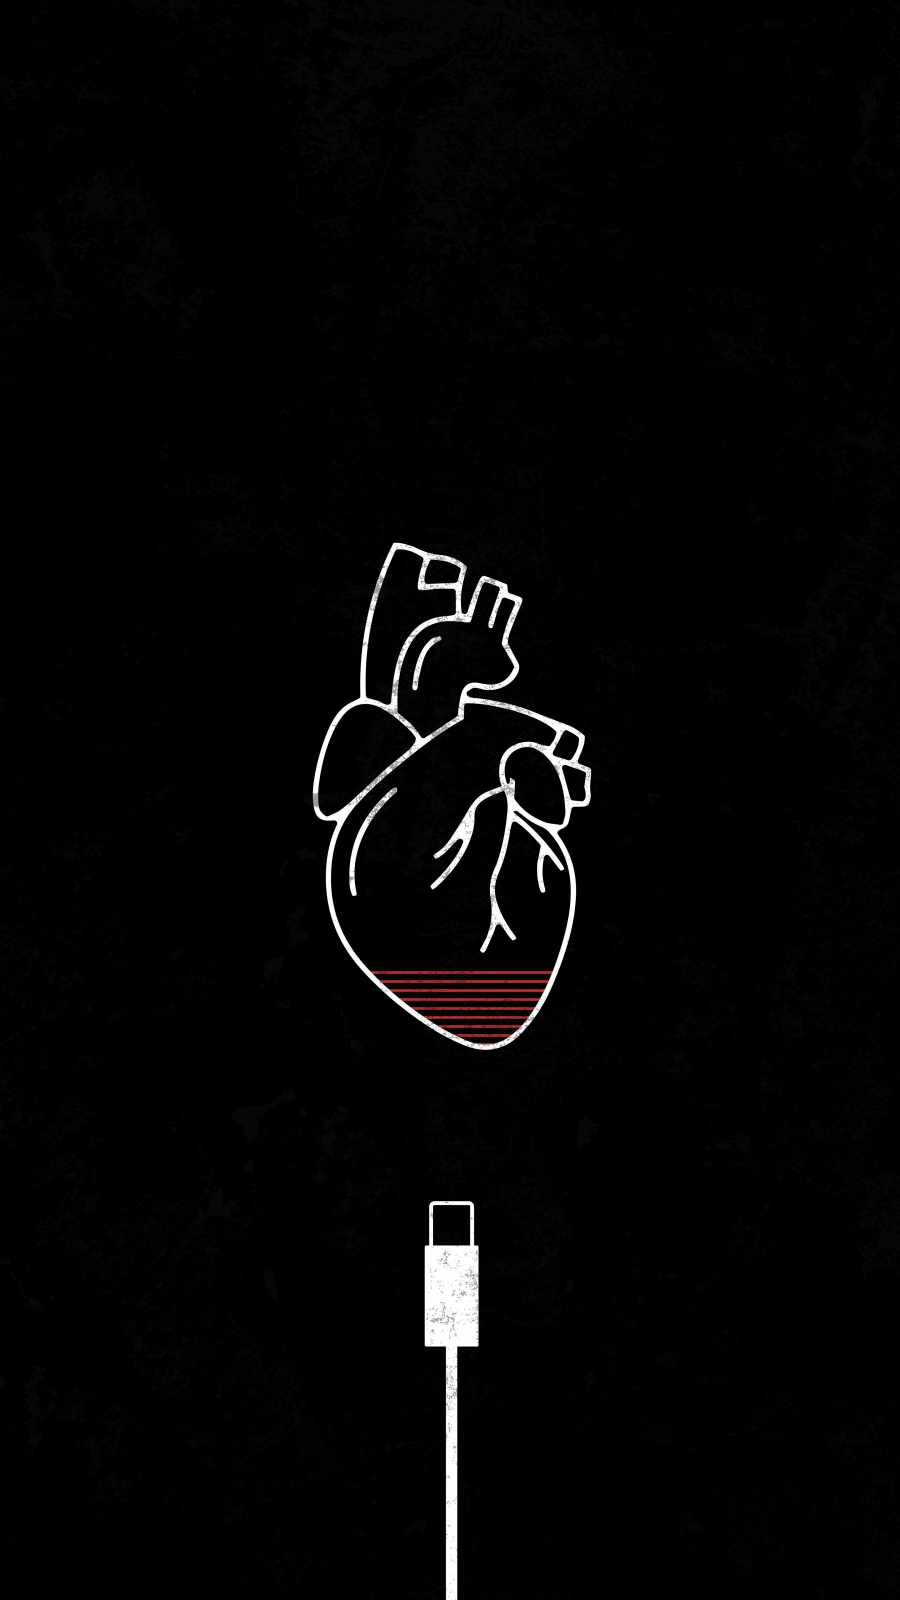 Heart Charge IPhone Wallpaper HD - IPhone Wallpapers : iPhone Wallpapers